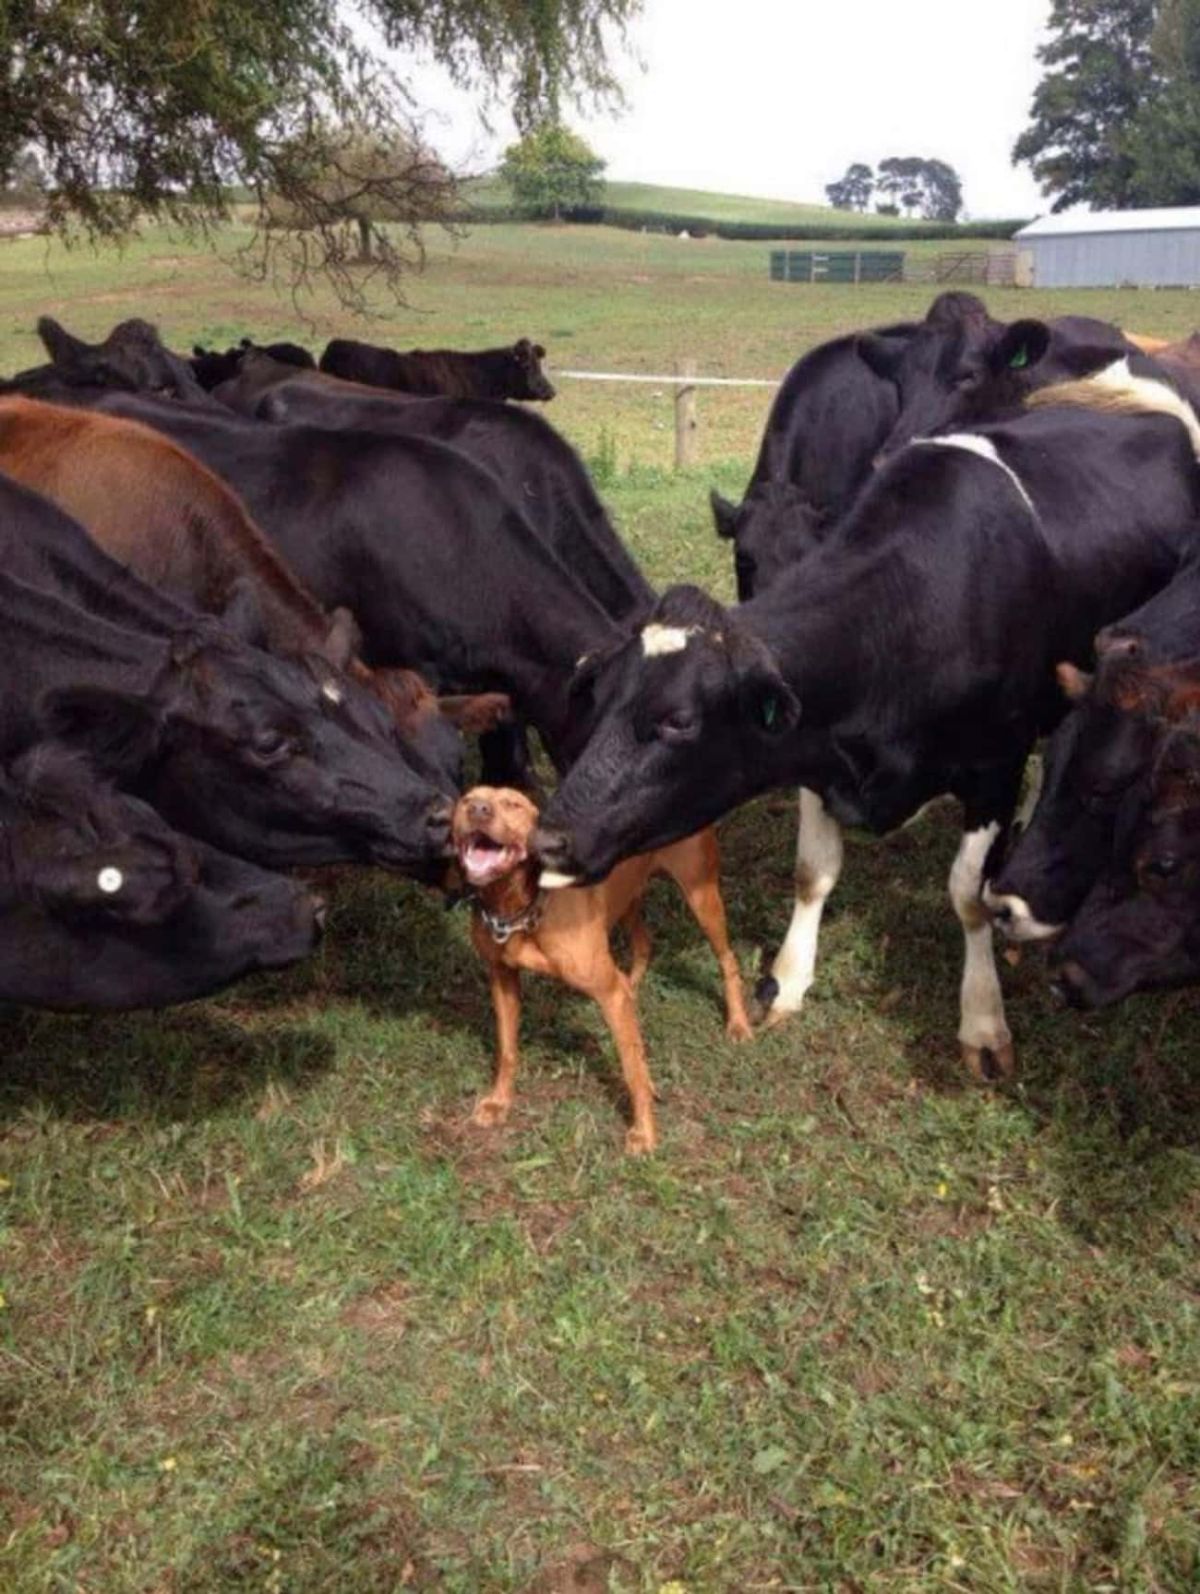 a group of cows sniffing and licking a smiling brown dog in a field